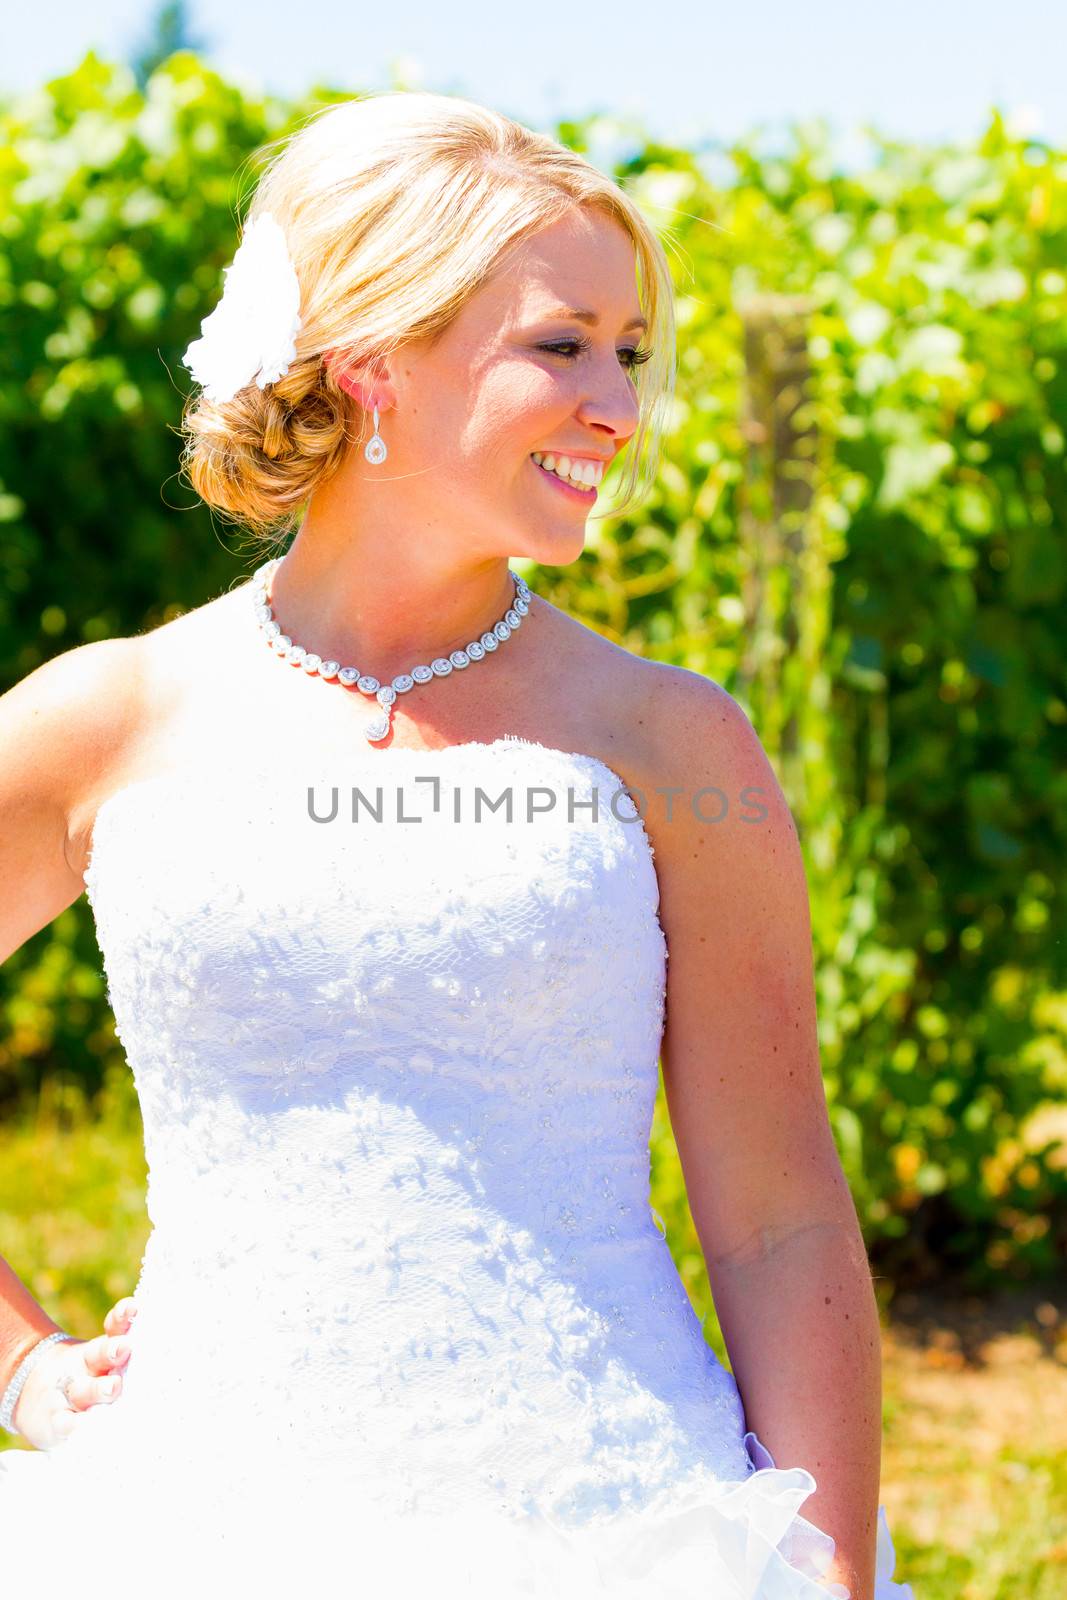 A beautiful bride wearing her wedding dress on her special day at a vineyard outdoors in Oregon during the summer.